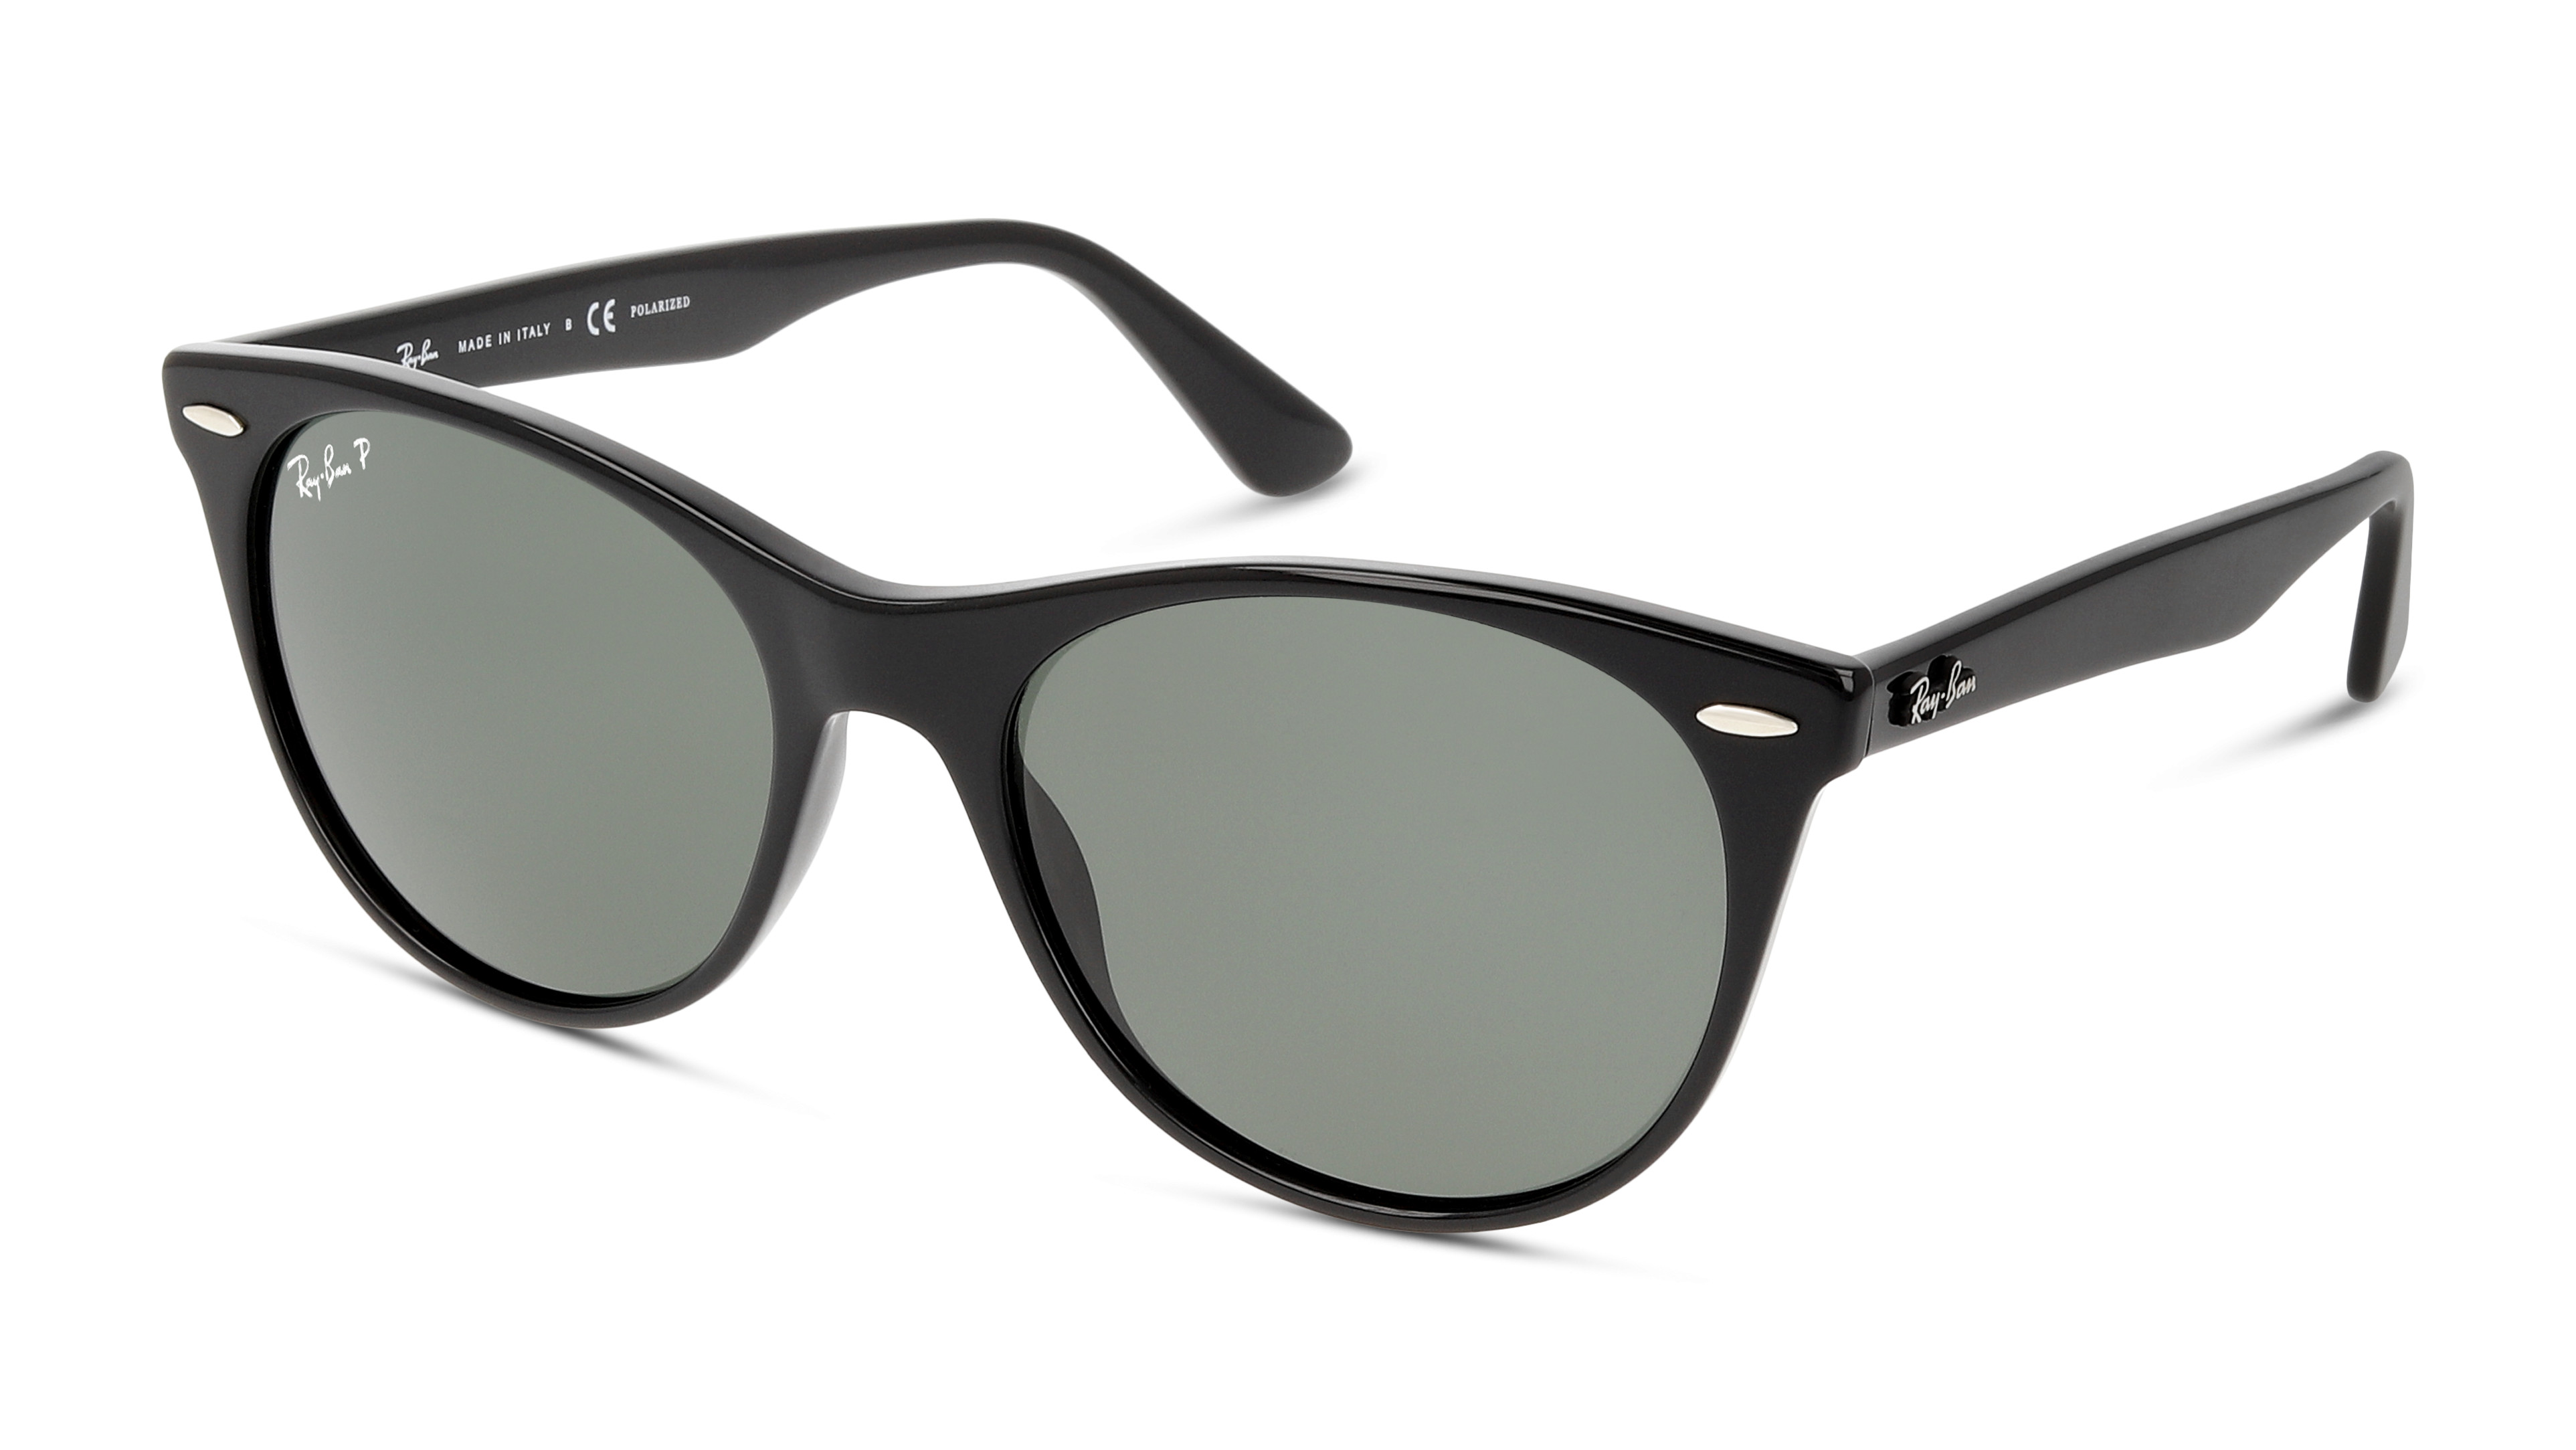 [products.image.angle_left01] Ray-Ban WAYFARER II 0RB2185 901/58 Sonnenbrille